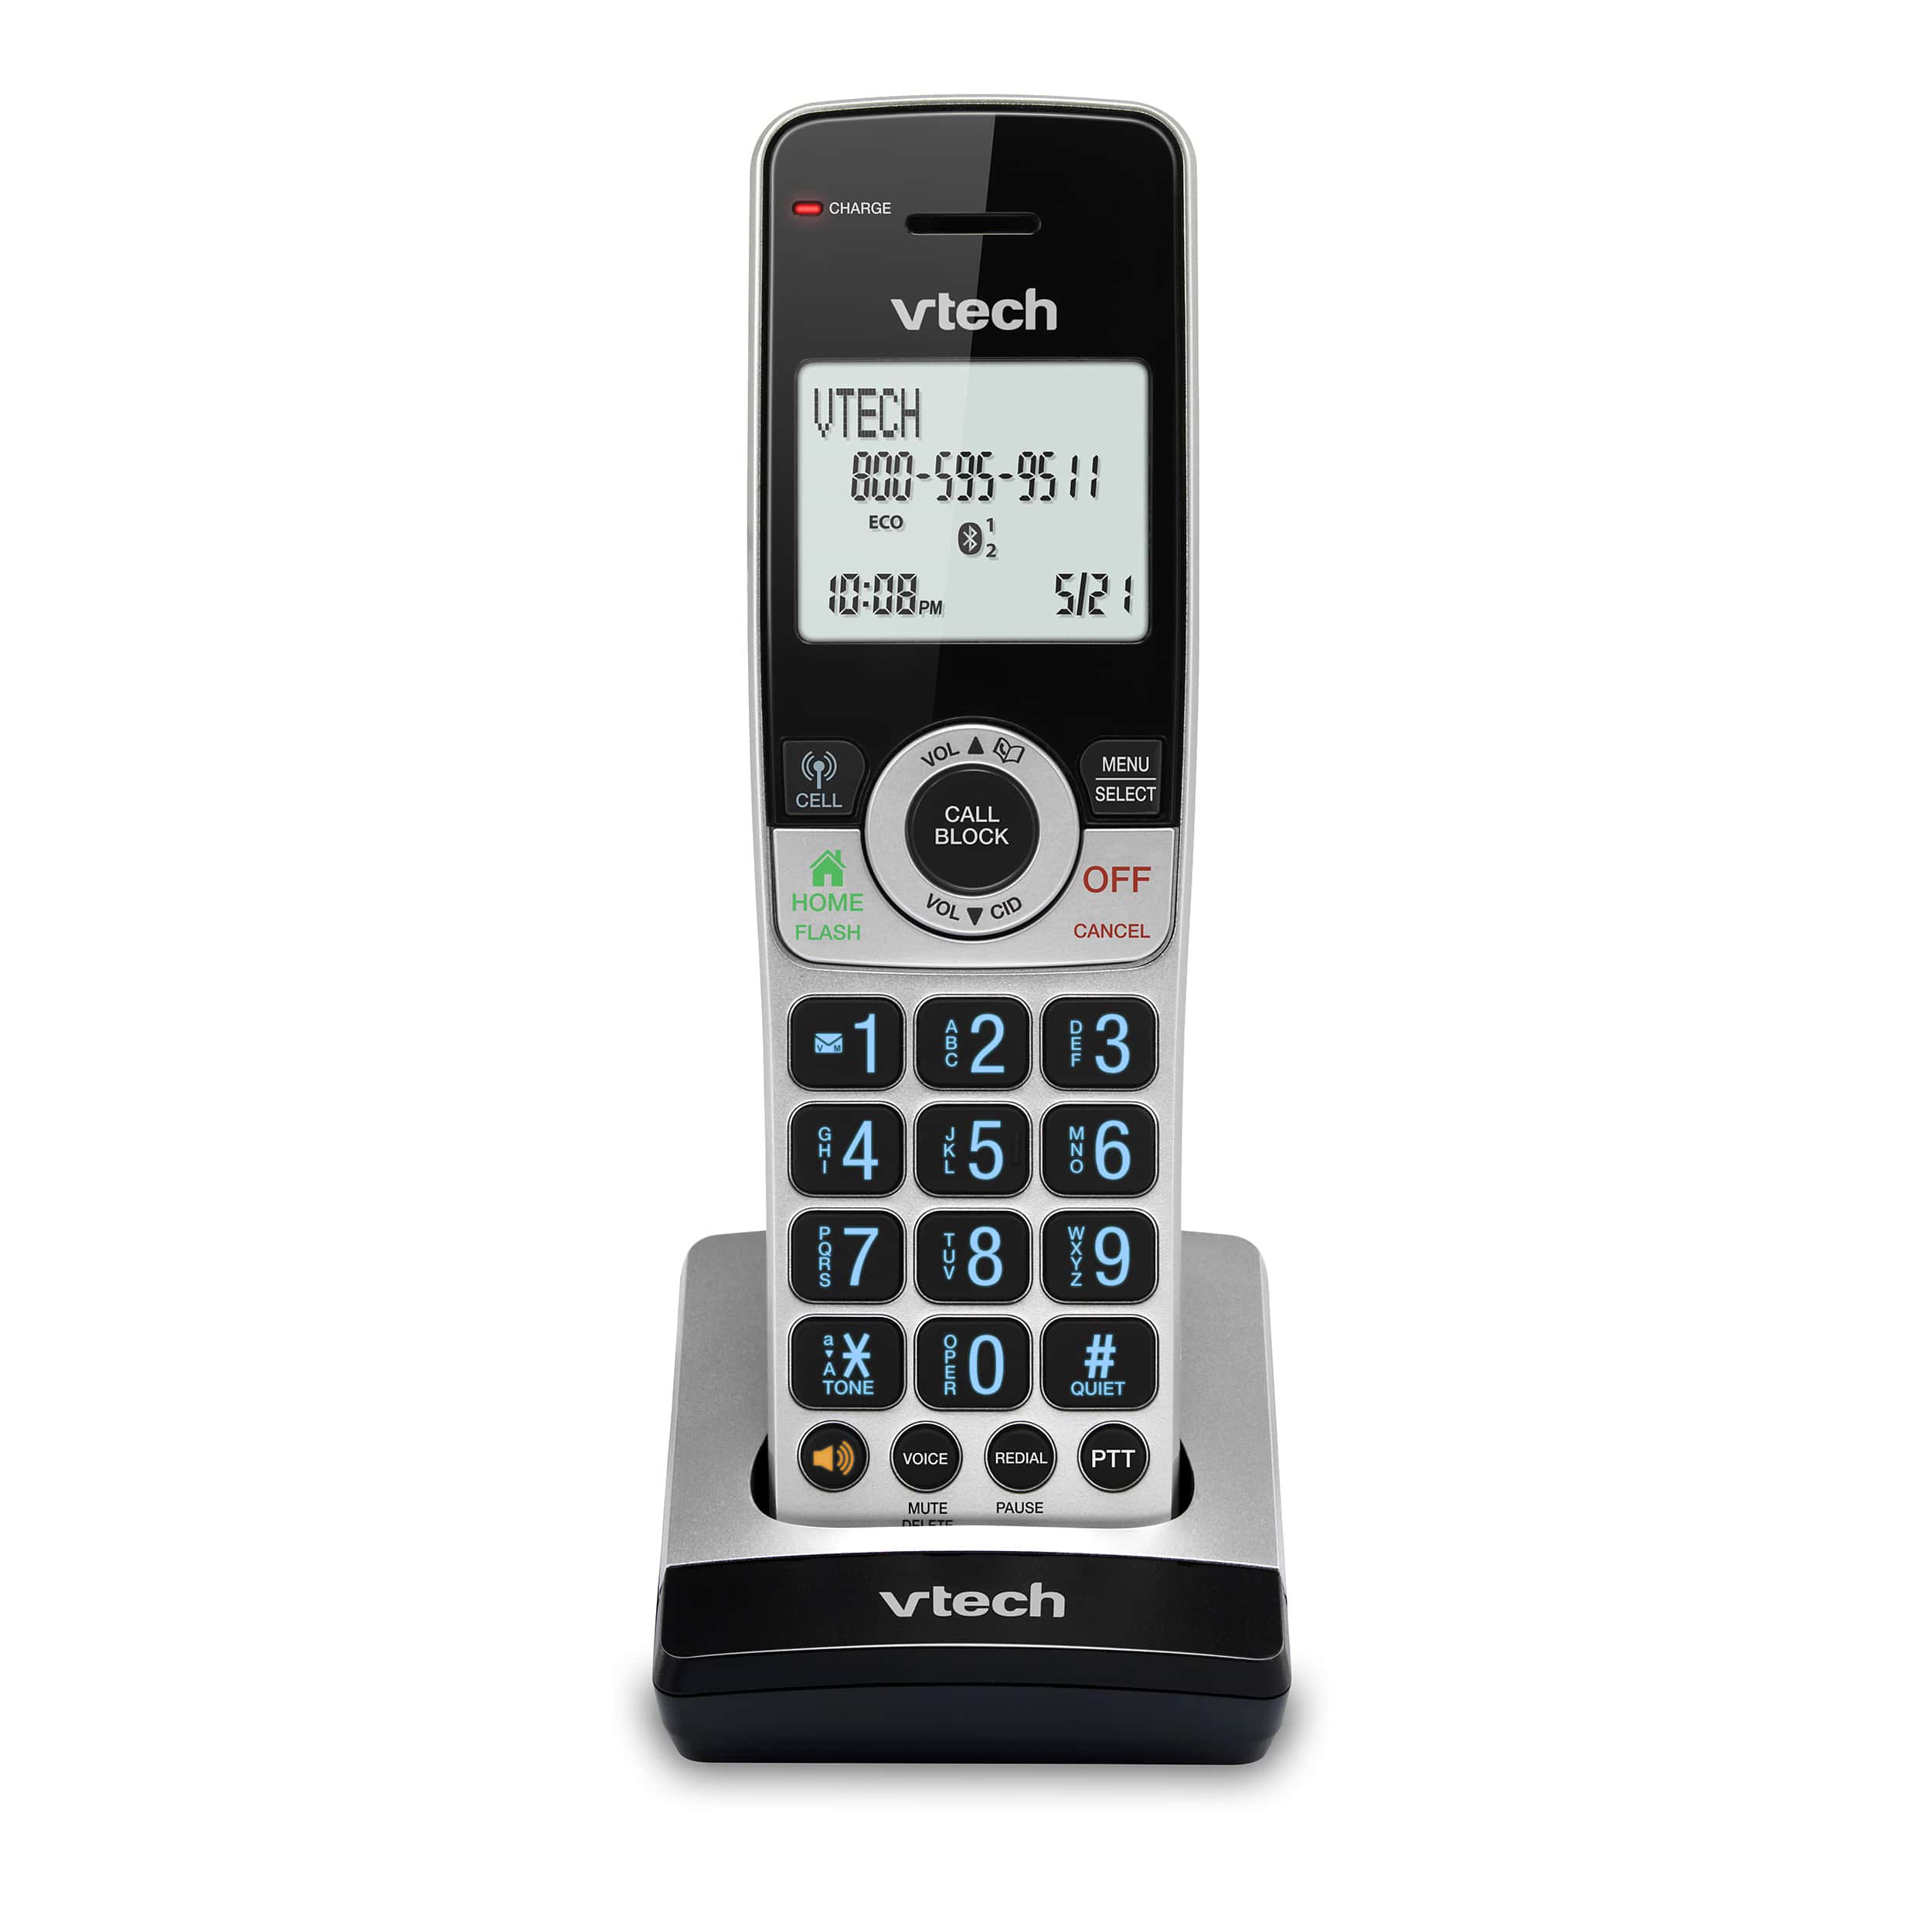 Accessory Handset with Bluetooth Connect to Cell, and Smart Call Blocker - view 1